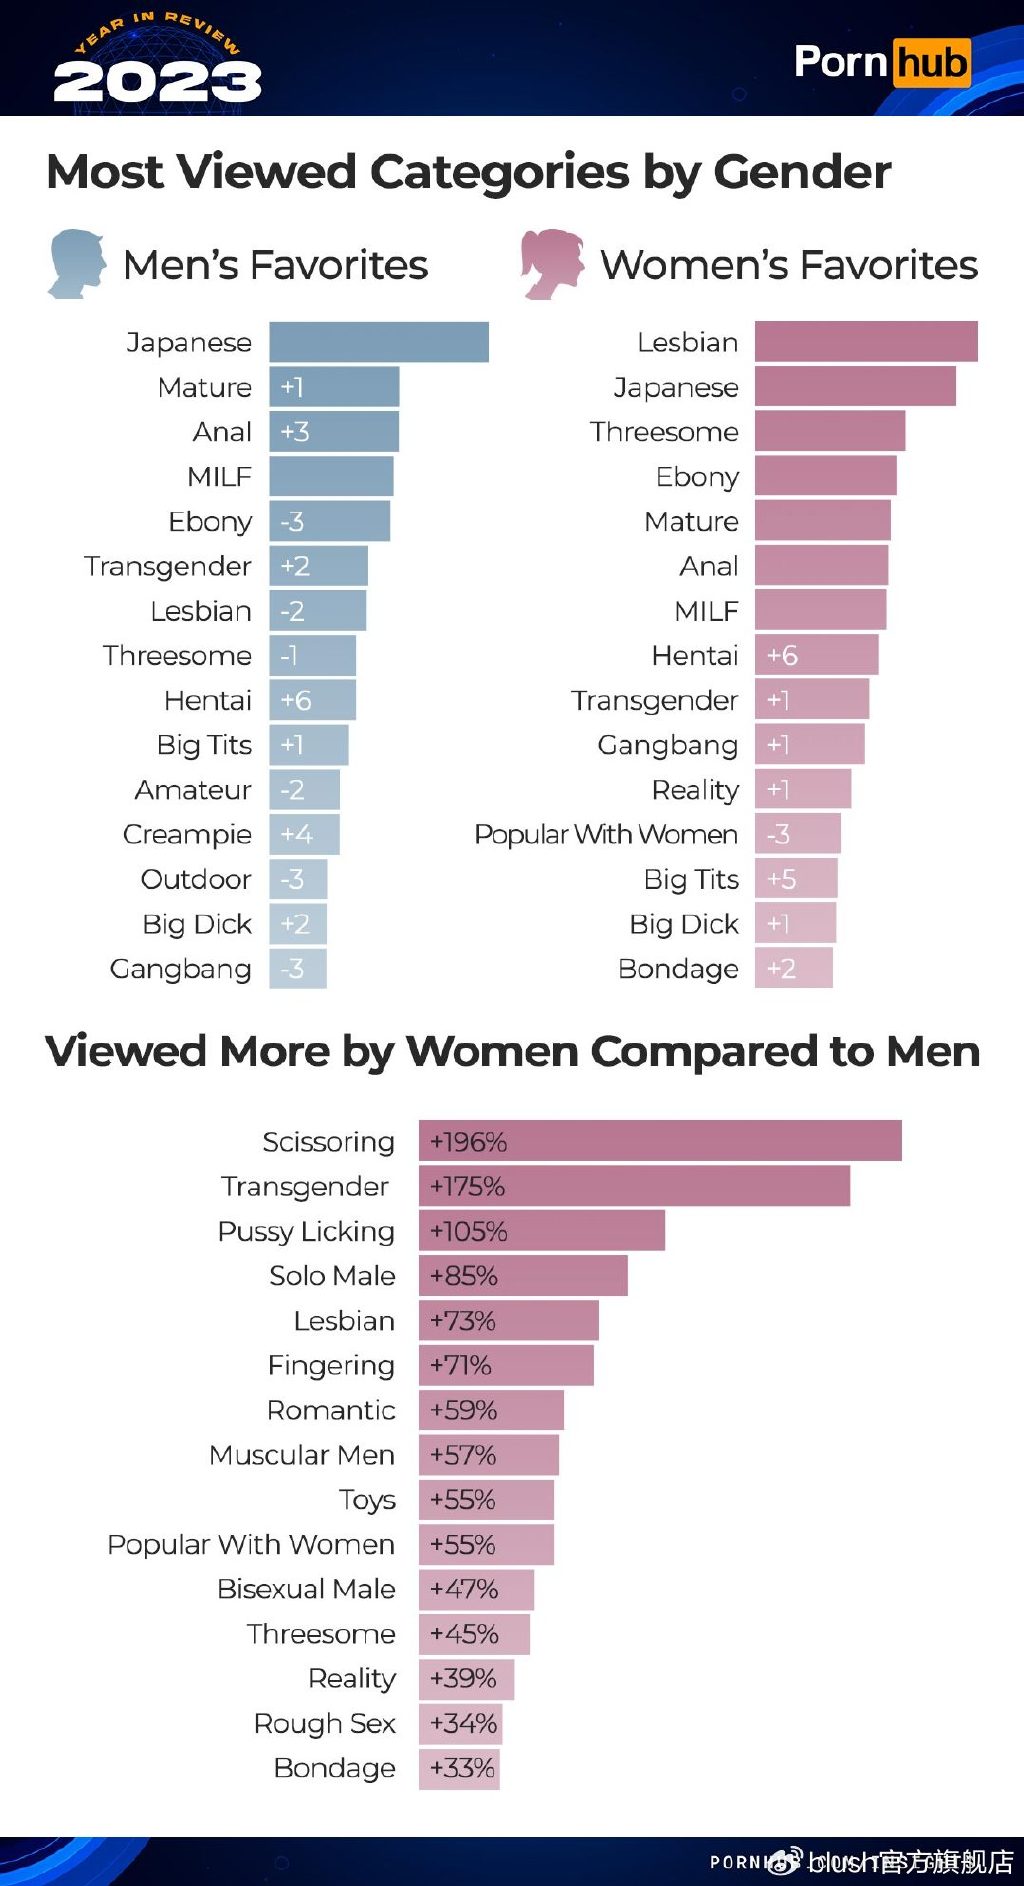 pornhub-insights-2023-year-in-review-gender-most-viewed-categories.jpg